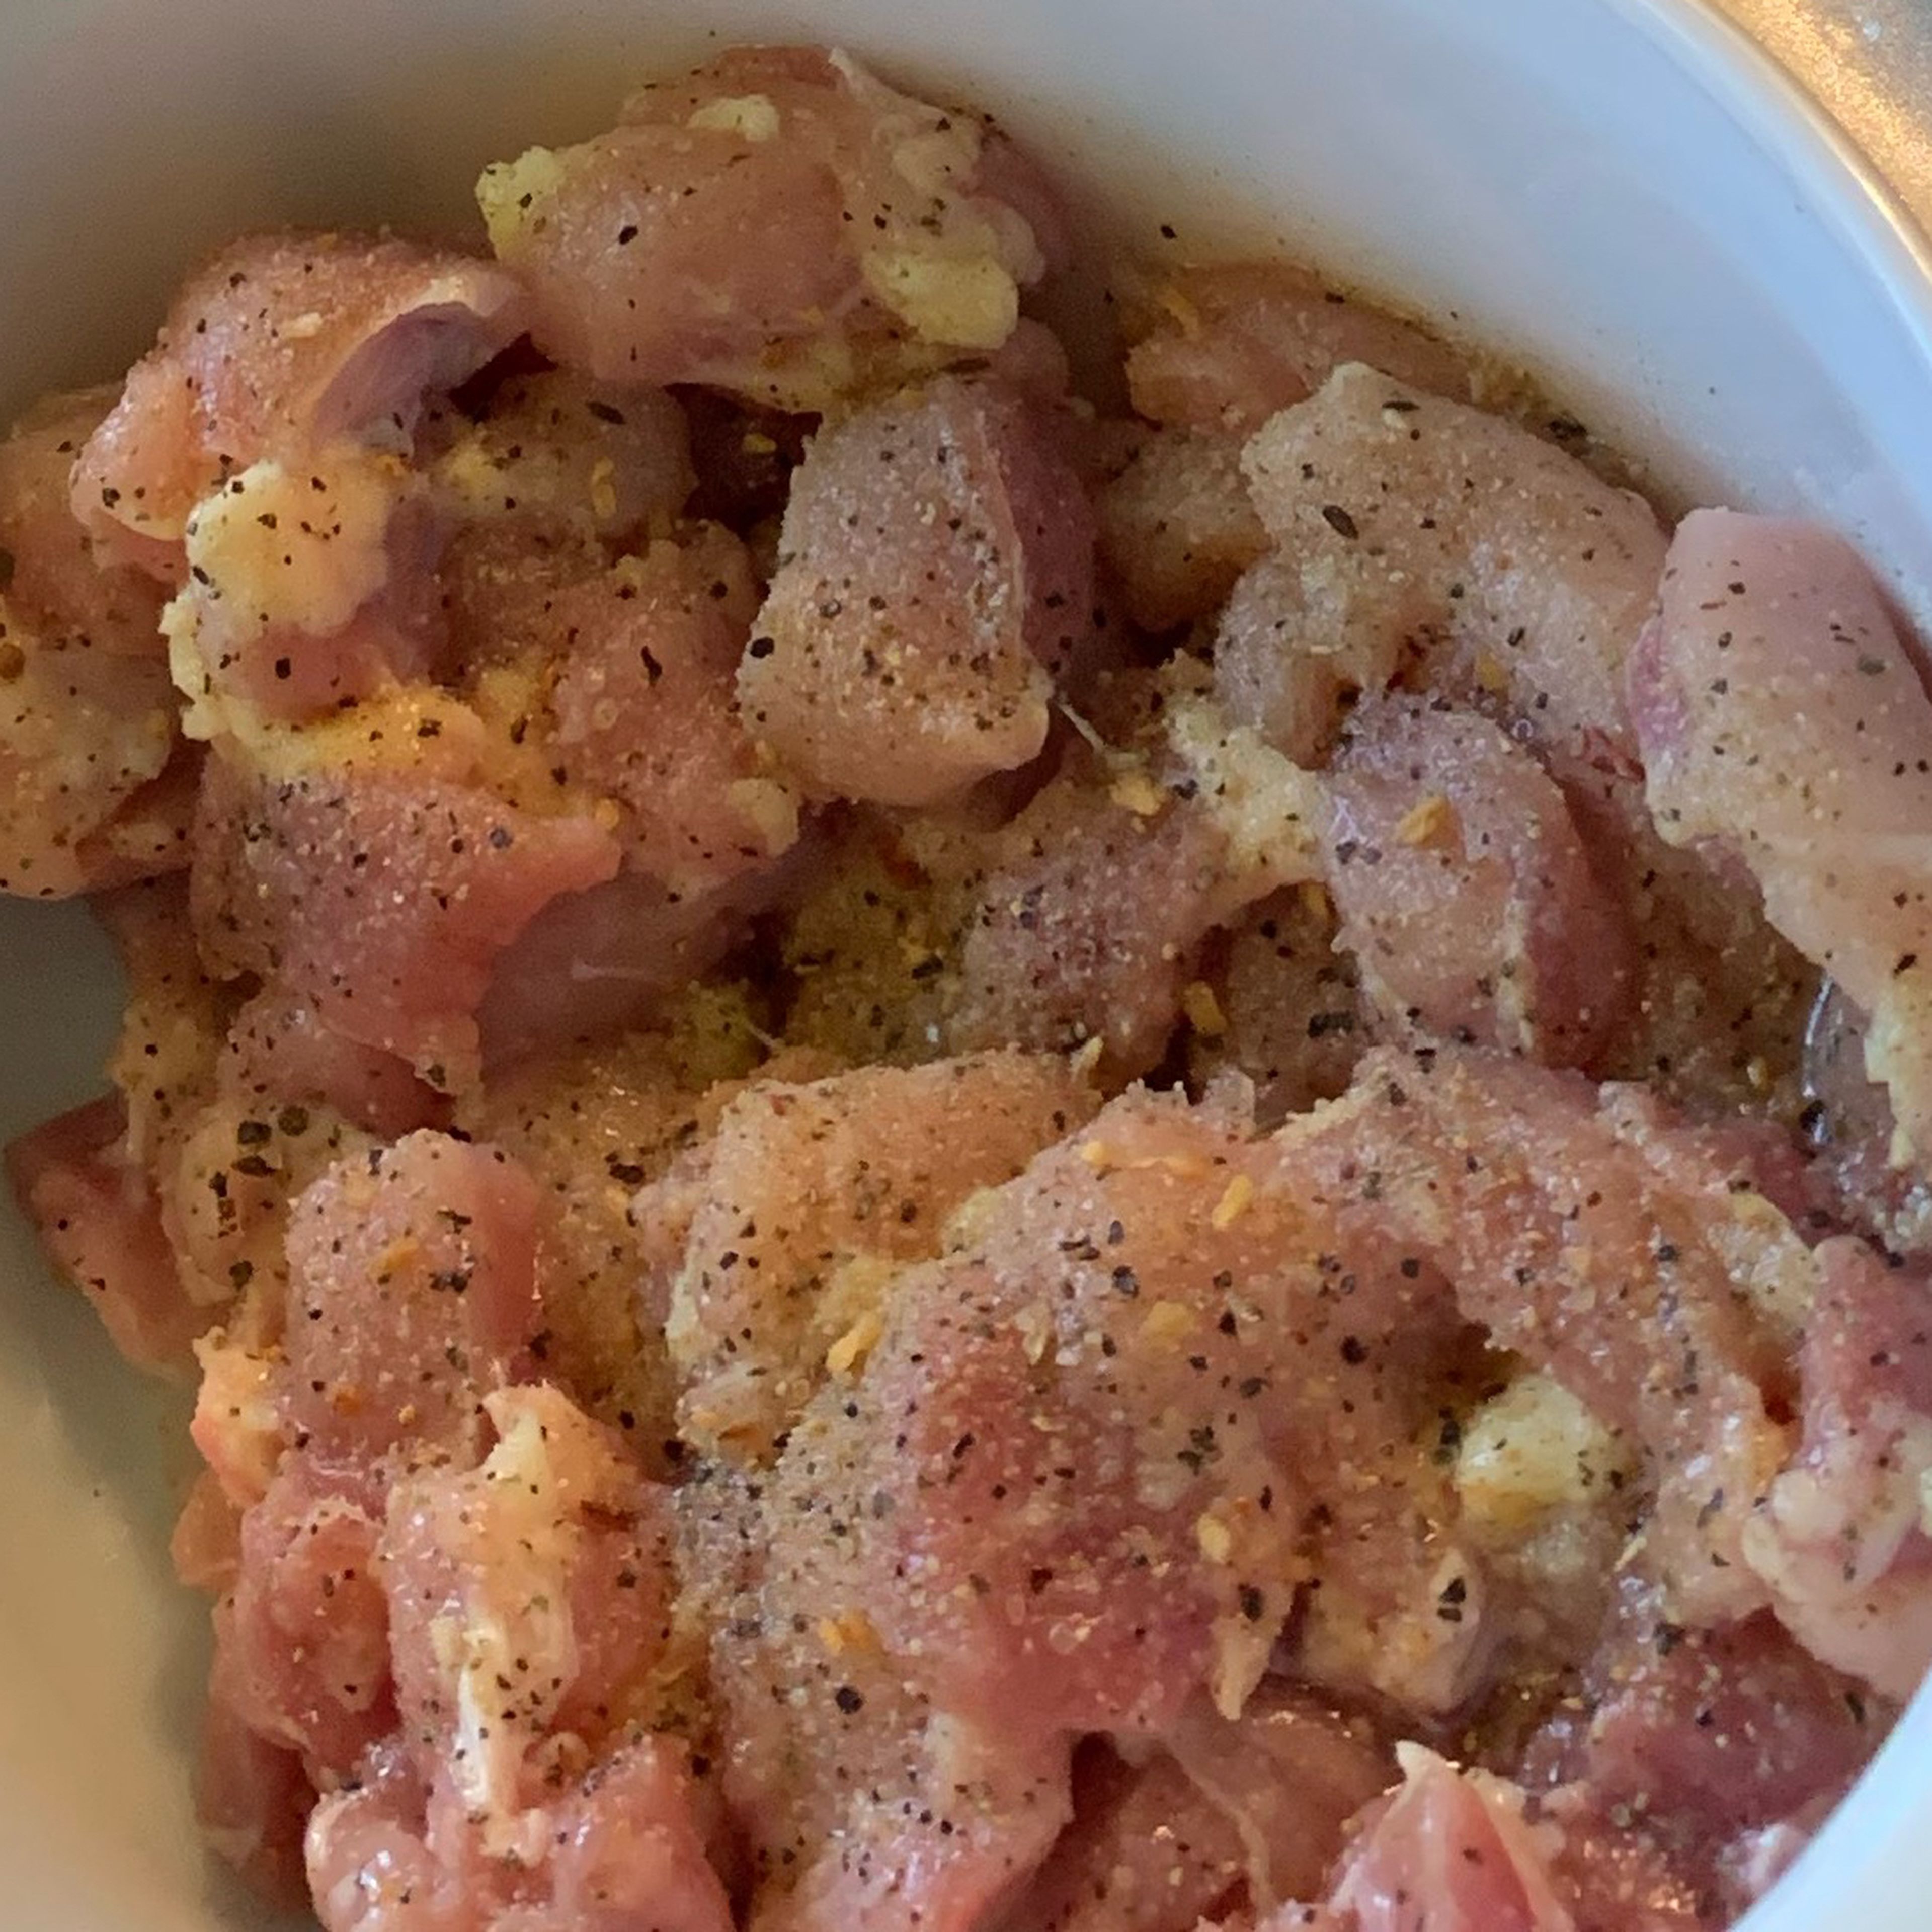 Rinse your chicken thighs under cold water and then pat them dry of any excess water. Next, cut them into small pieces to your desired likeness. Cover them in olive oil along with your all purpose seasoning blend then set aside to quickly marinate.